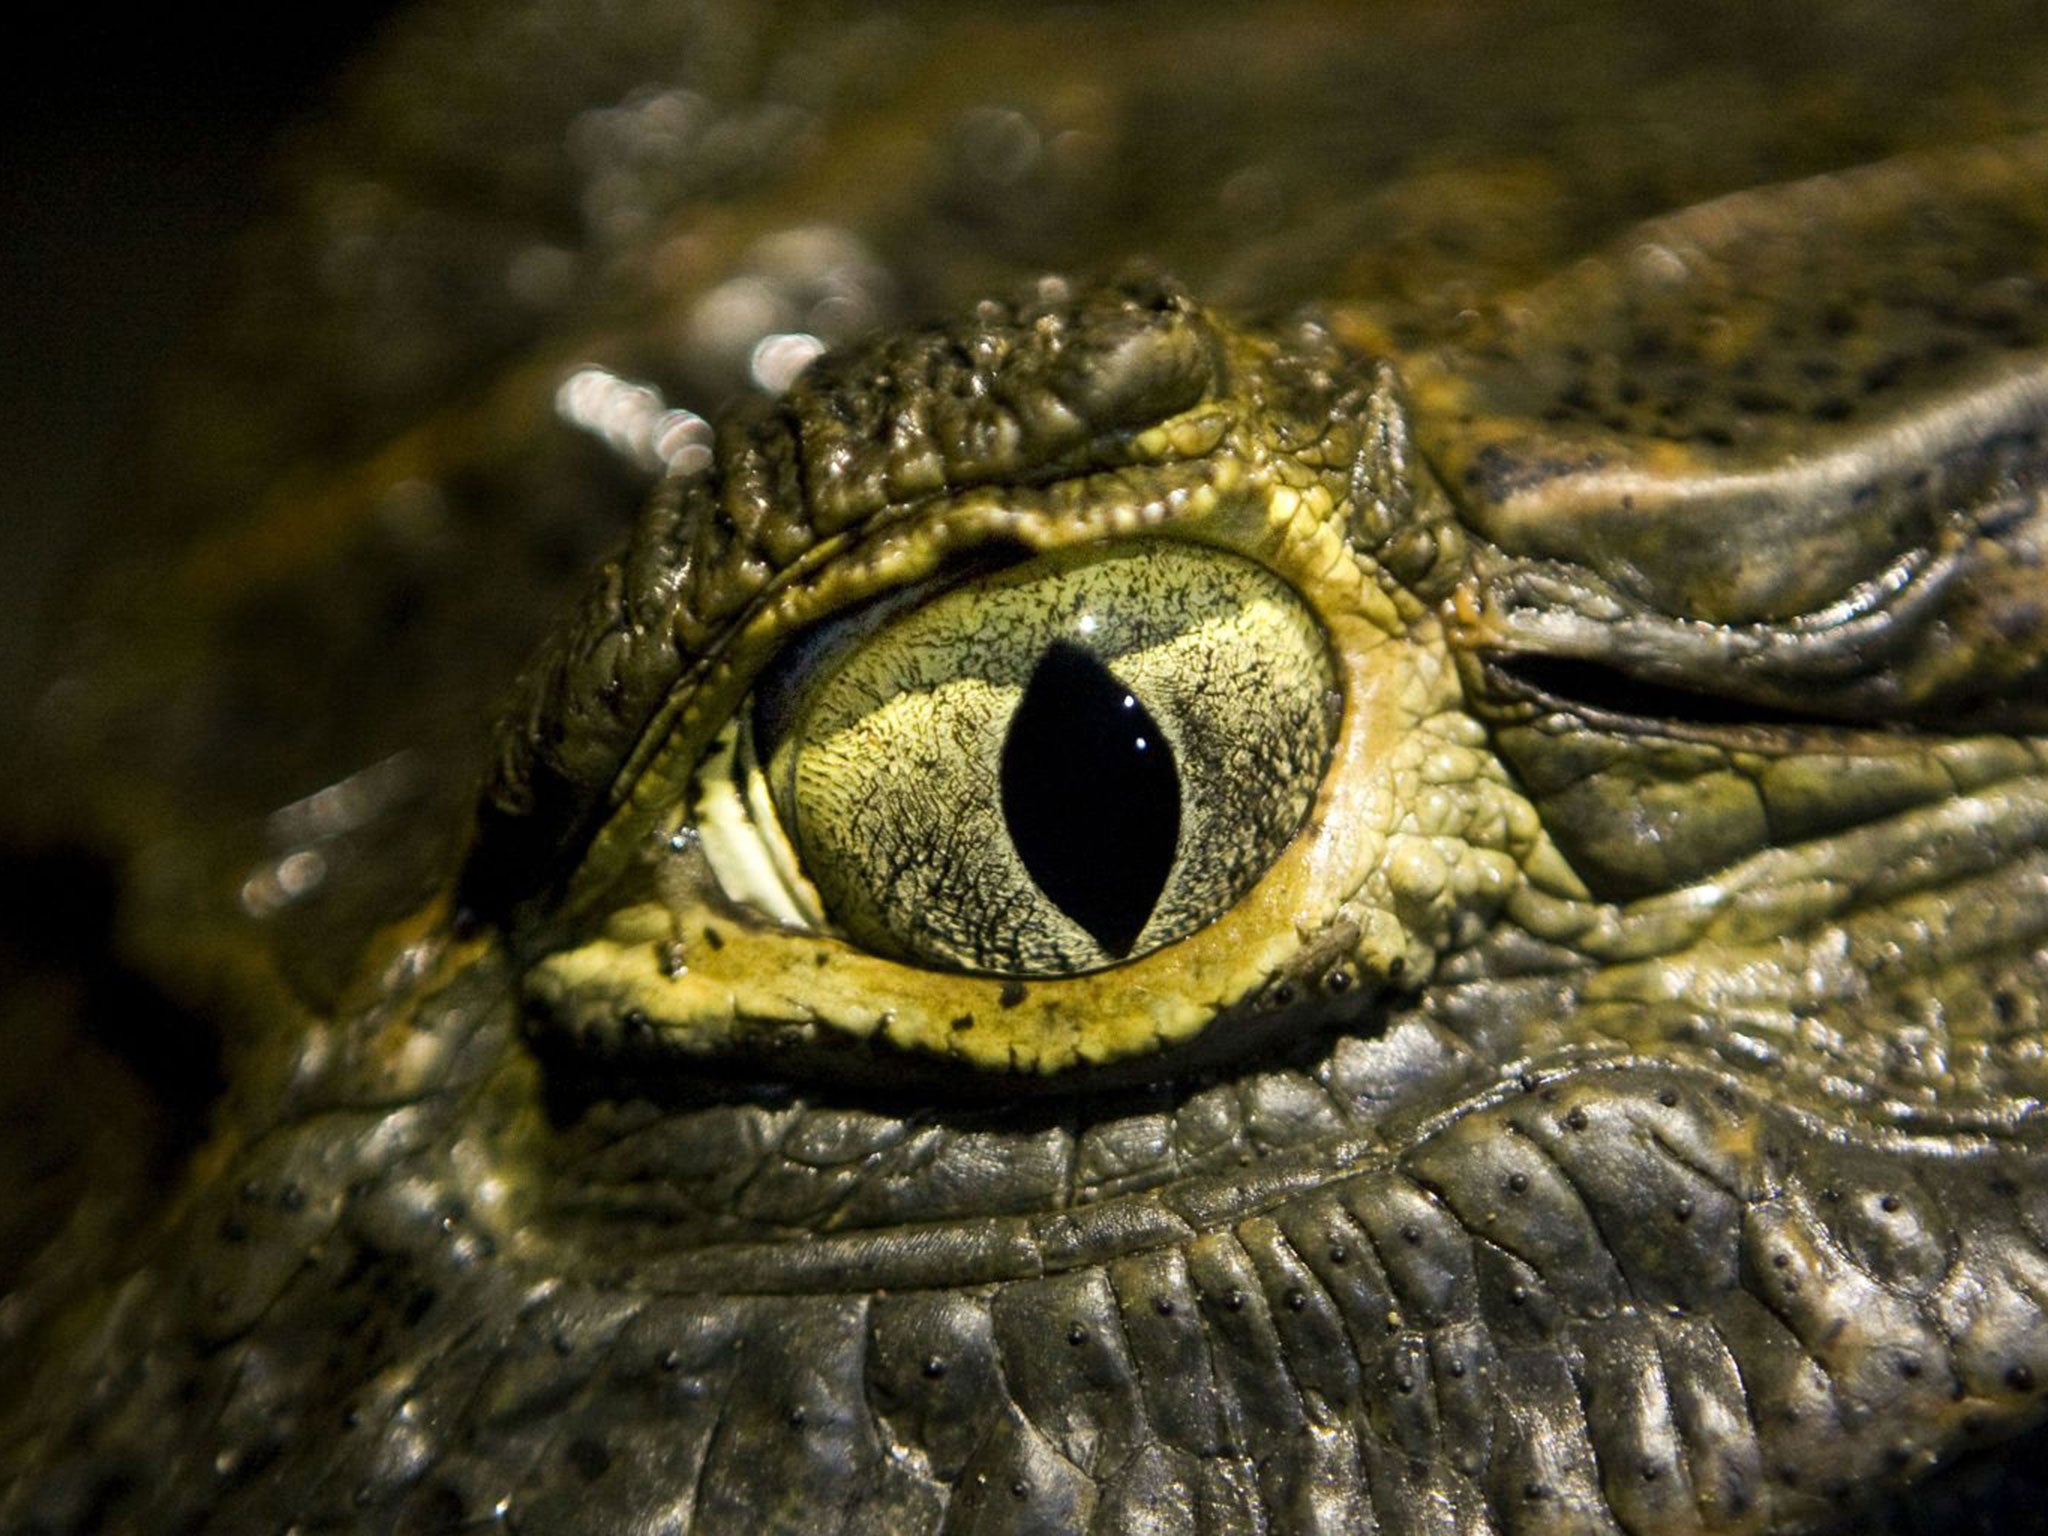 The crocodile’s vertically slitted eyes help it judge distance at low levels, allowing it to move snappily to take its prey at speed